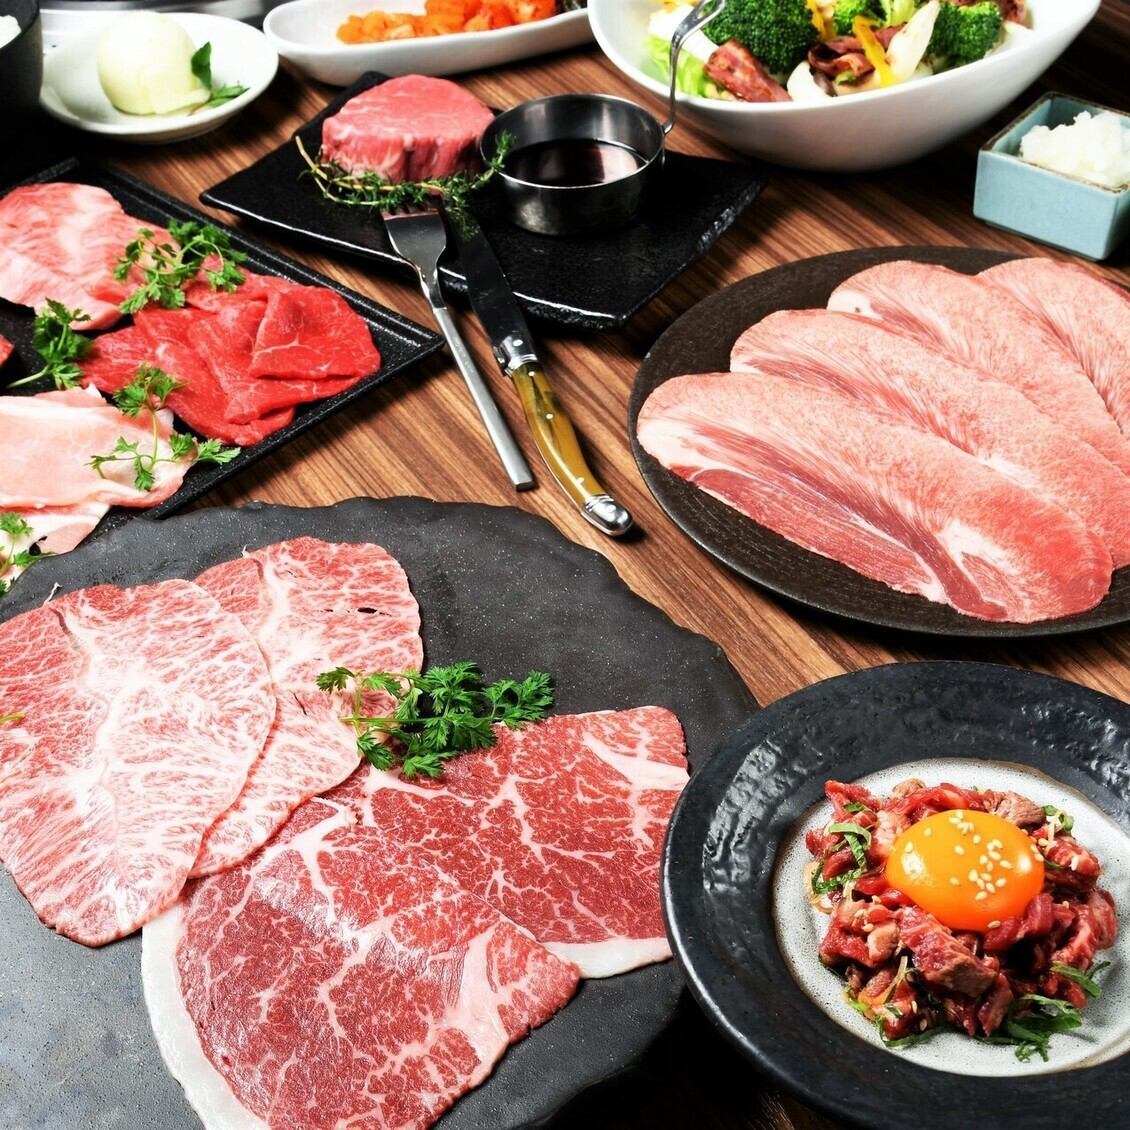 Lunch & takeout OK! Anyone can feel free to enjoy safe and reliable yakiniku in a fashionable space ♪